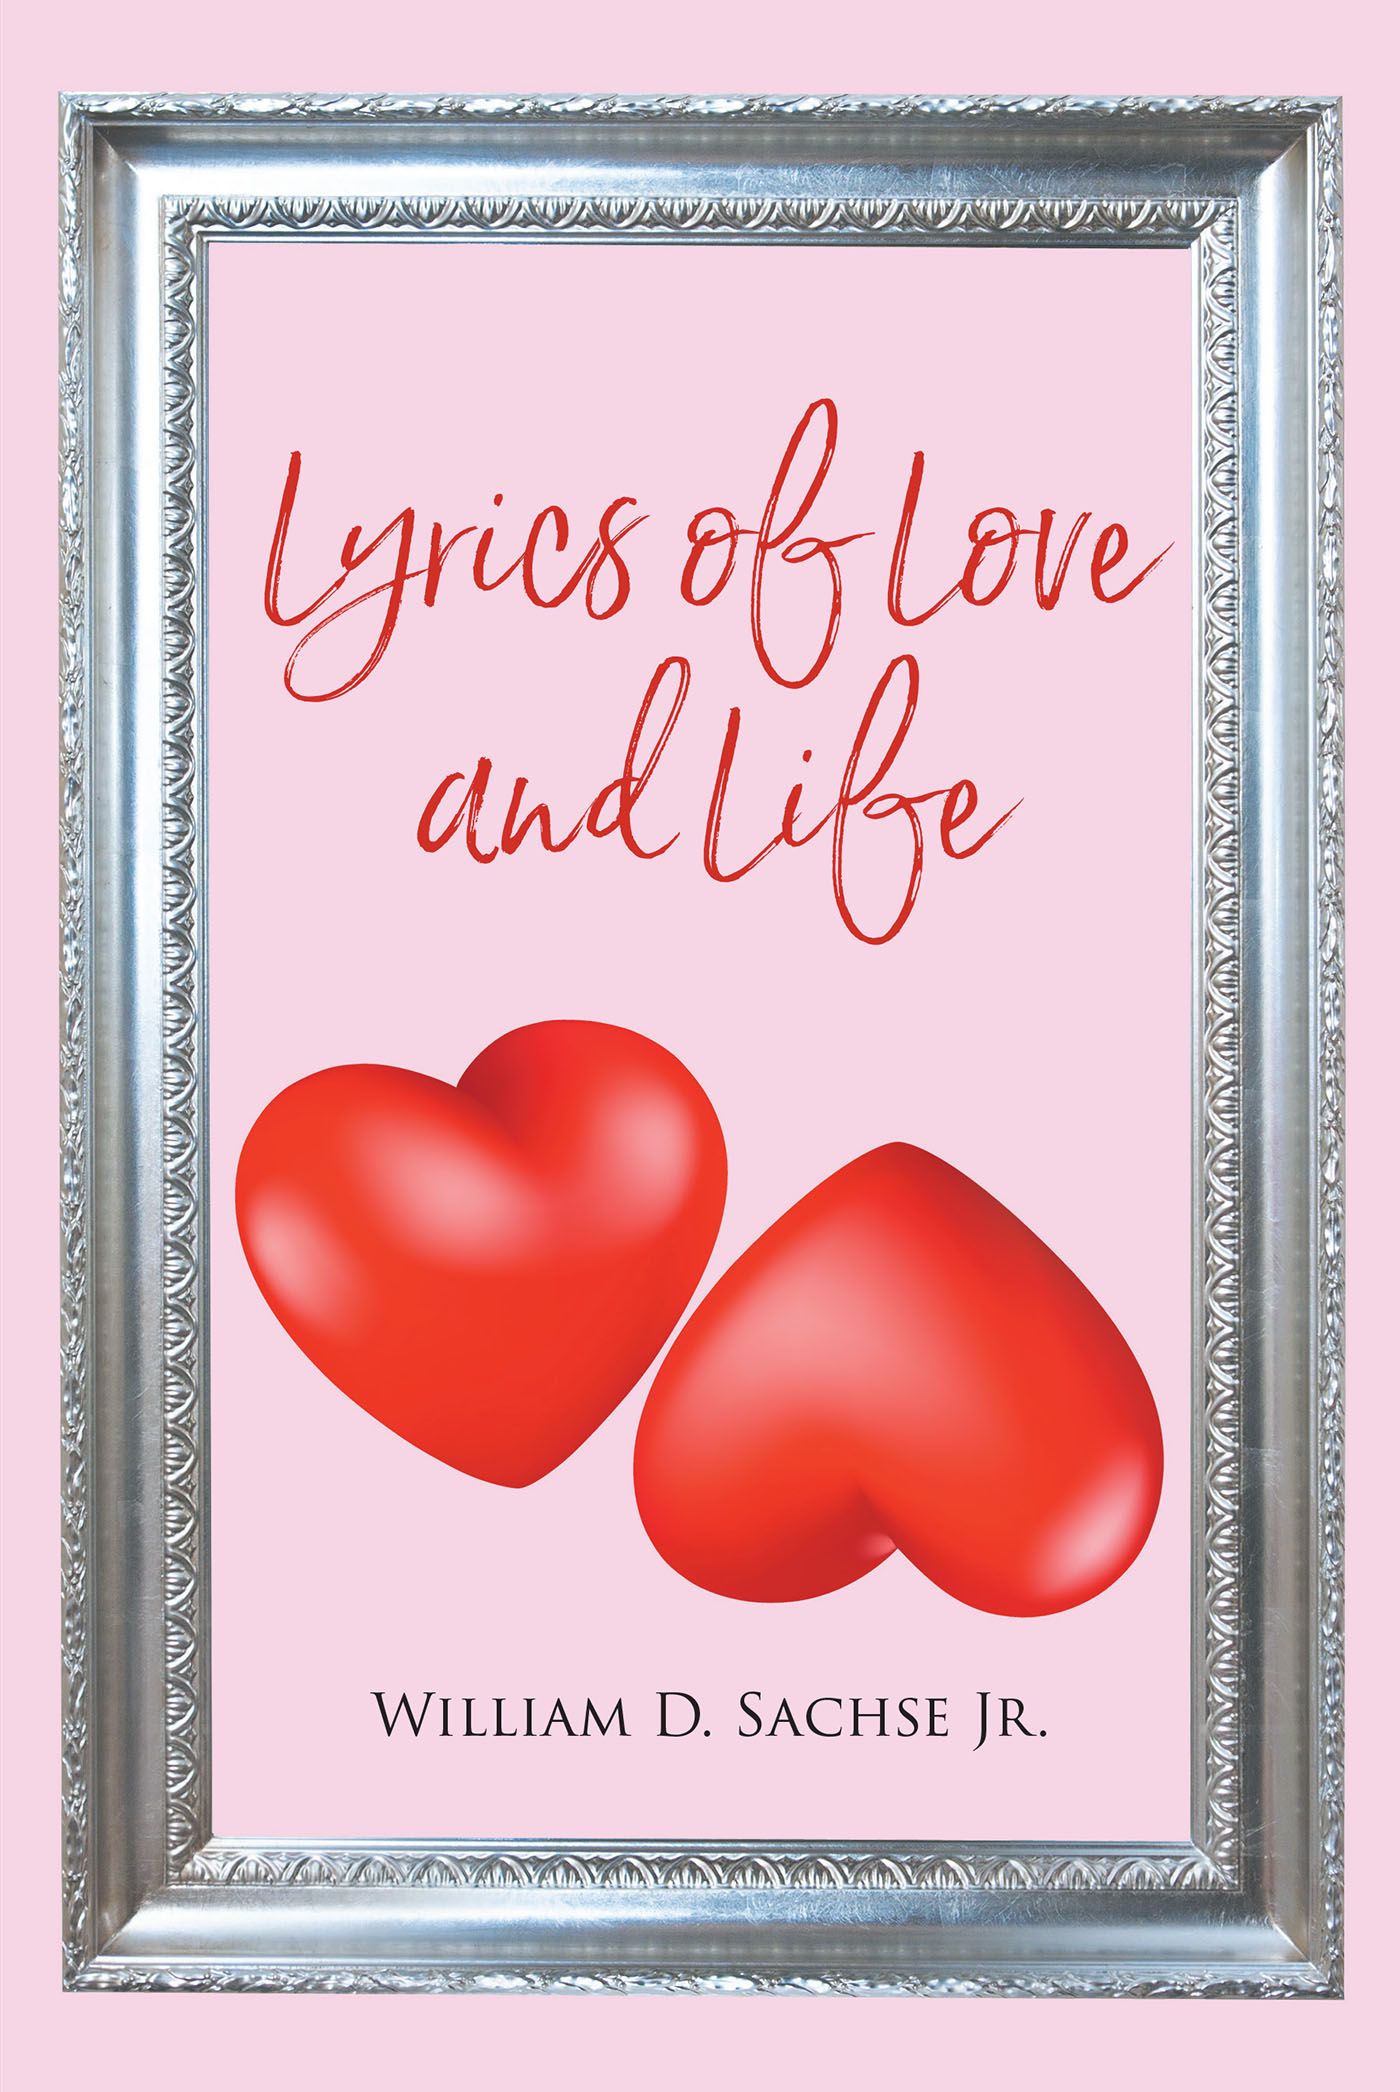 Lyrics of Love and Life Cover Image